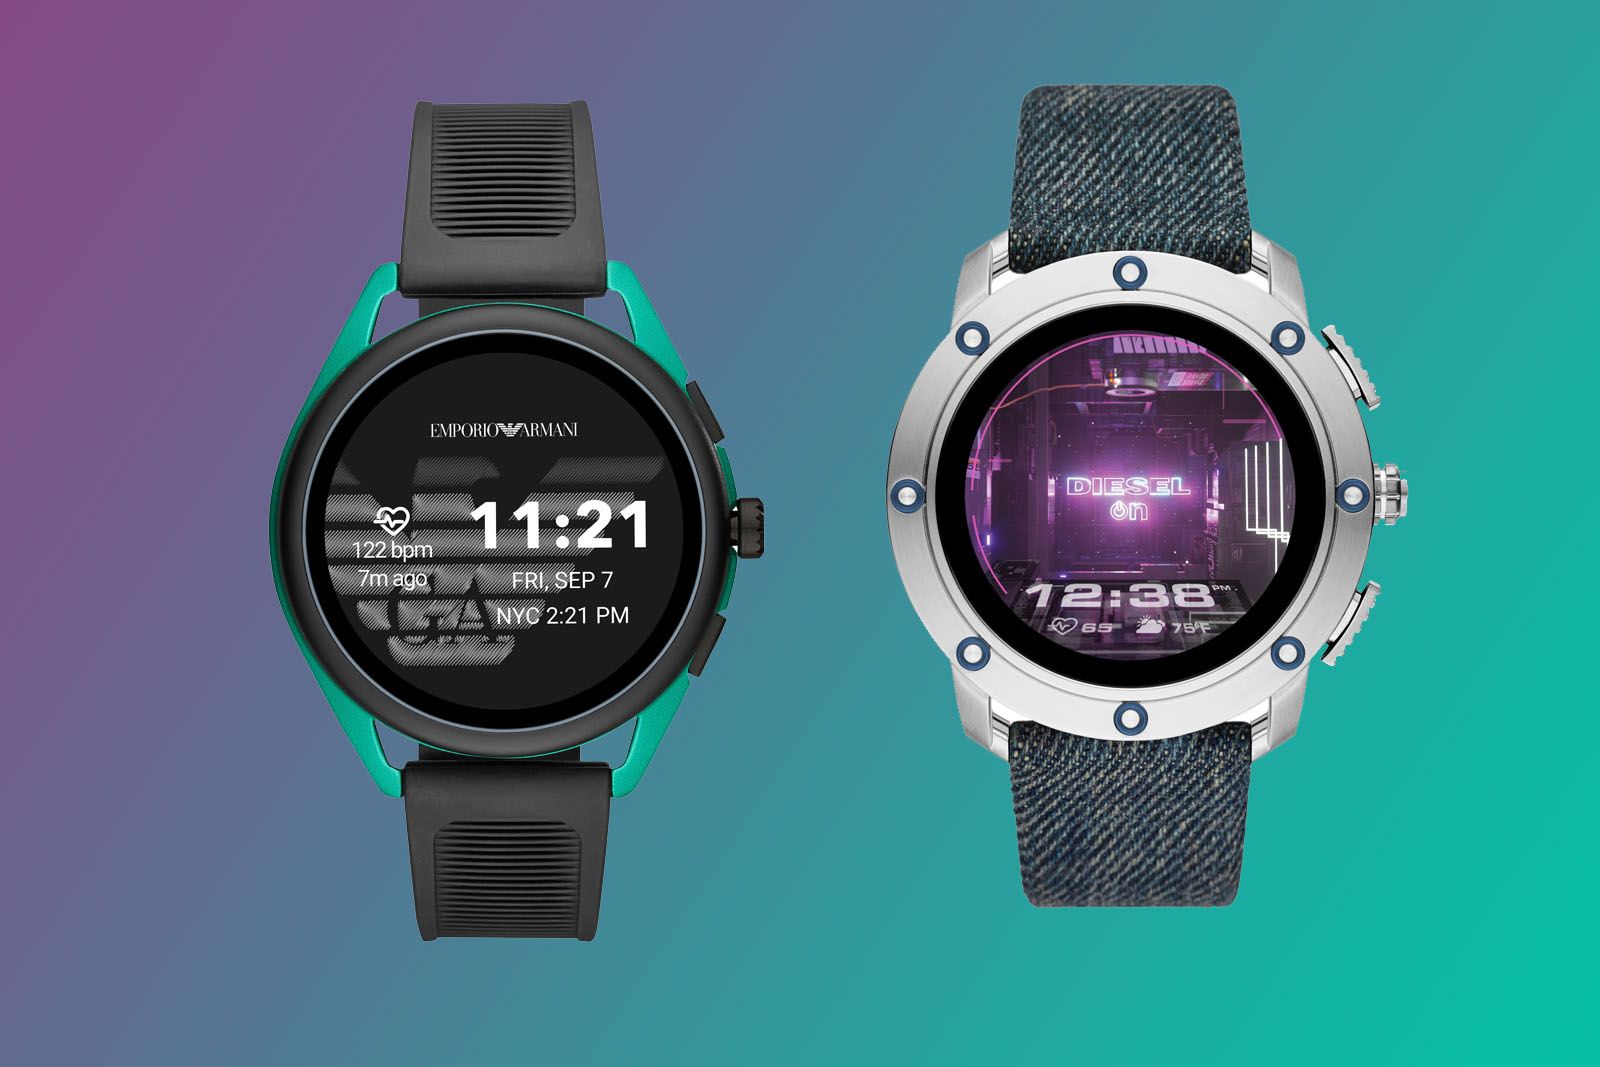 Fossil expands smartwatch line-up with Diesel and Emporio Armani models image 1